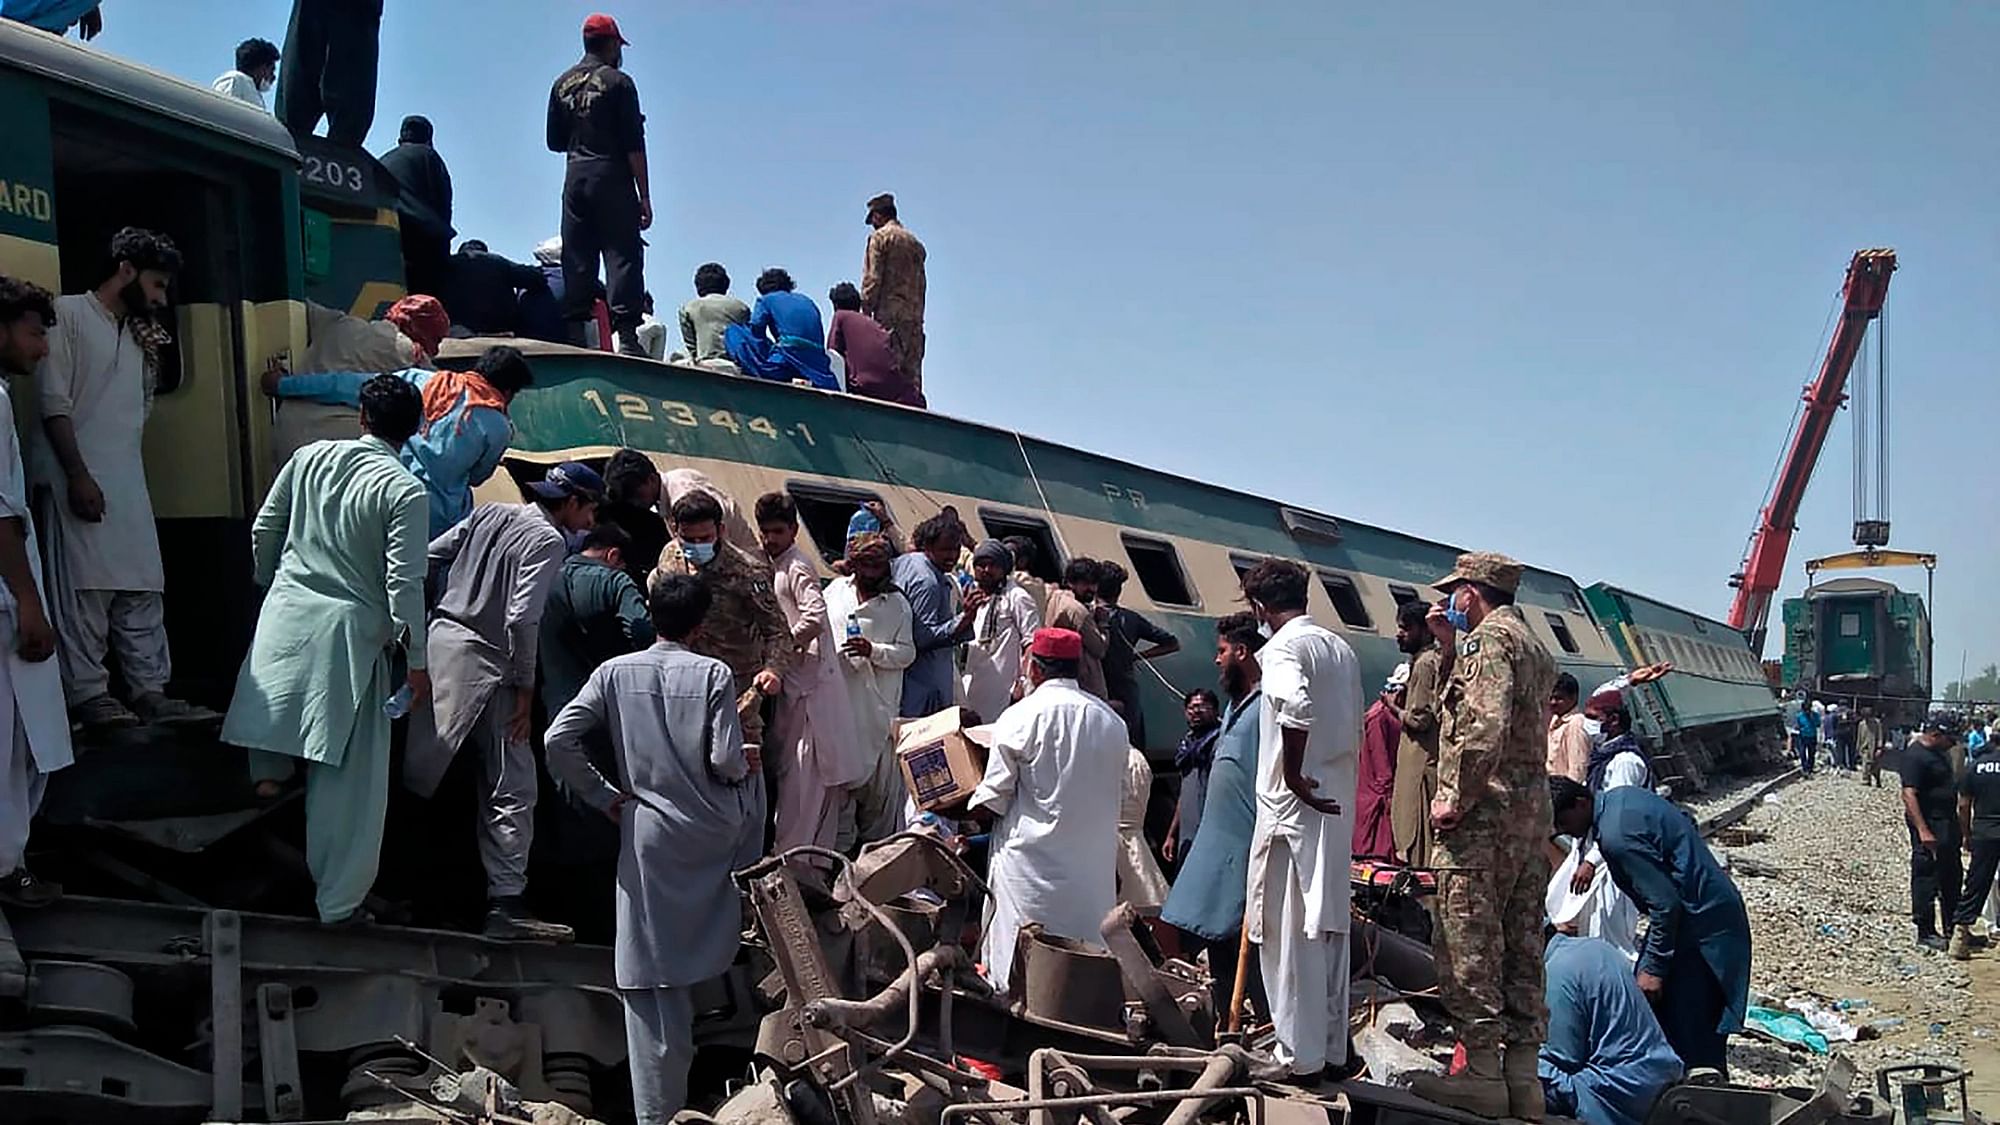 Two trains collide in an accident killing at least 40 passengers in Pakistan’s Sindh.